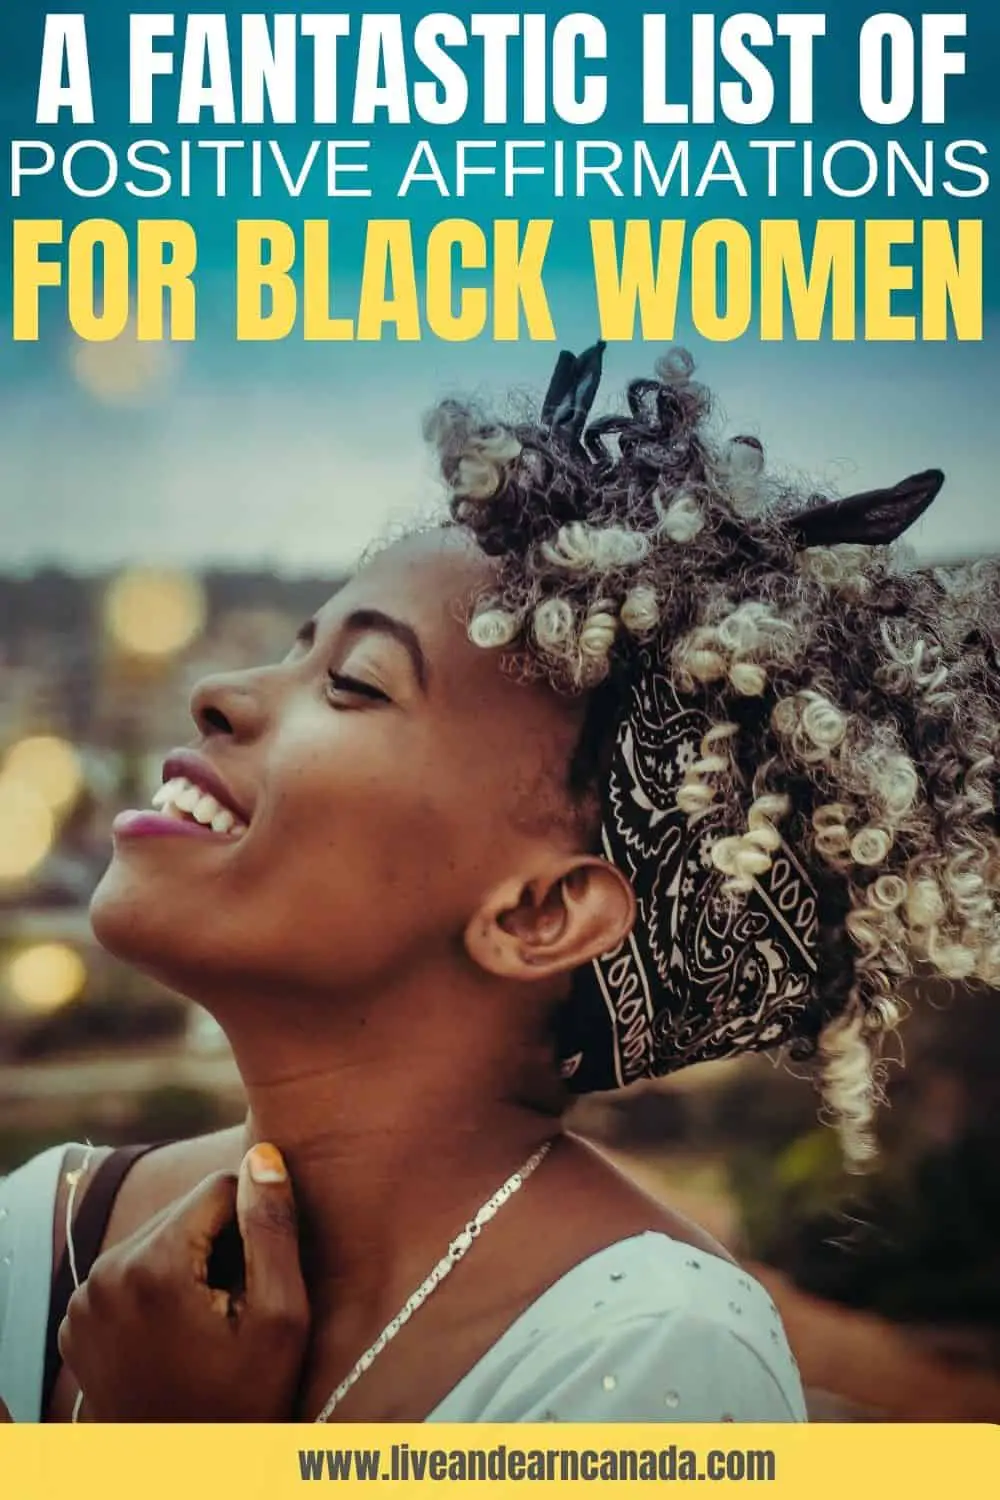 Positive Affirmations for Black Women, here are our best. If you are looking for daily affirmations for black women, look no further than this post. We have a great list of motivational affirmations that black women can use #possitiveaffirmations #blackwomen